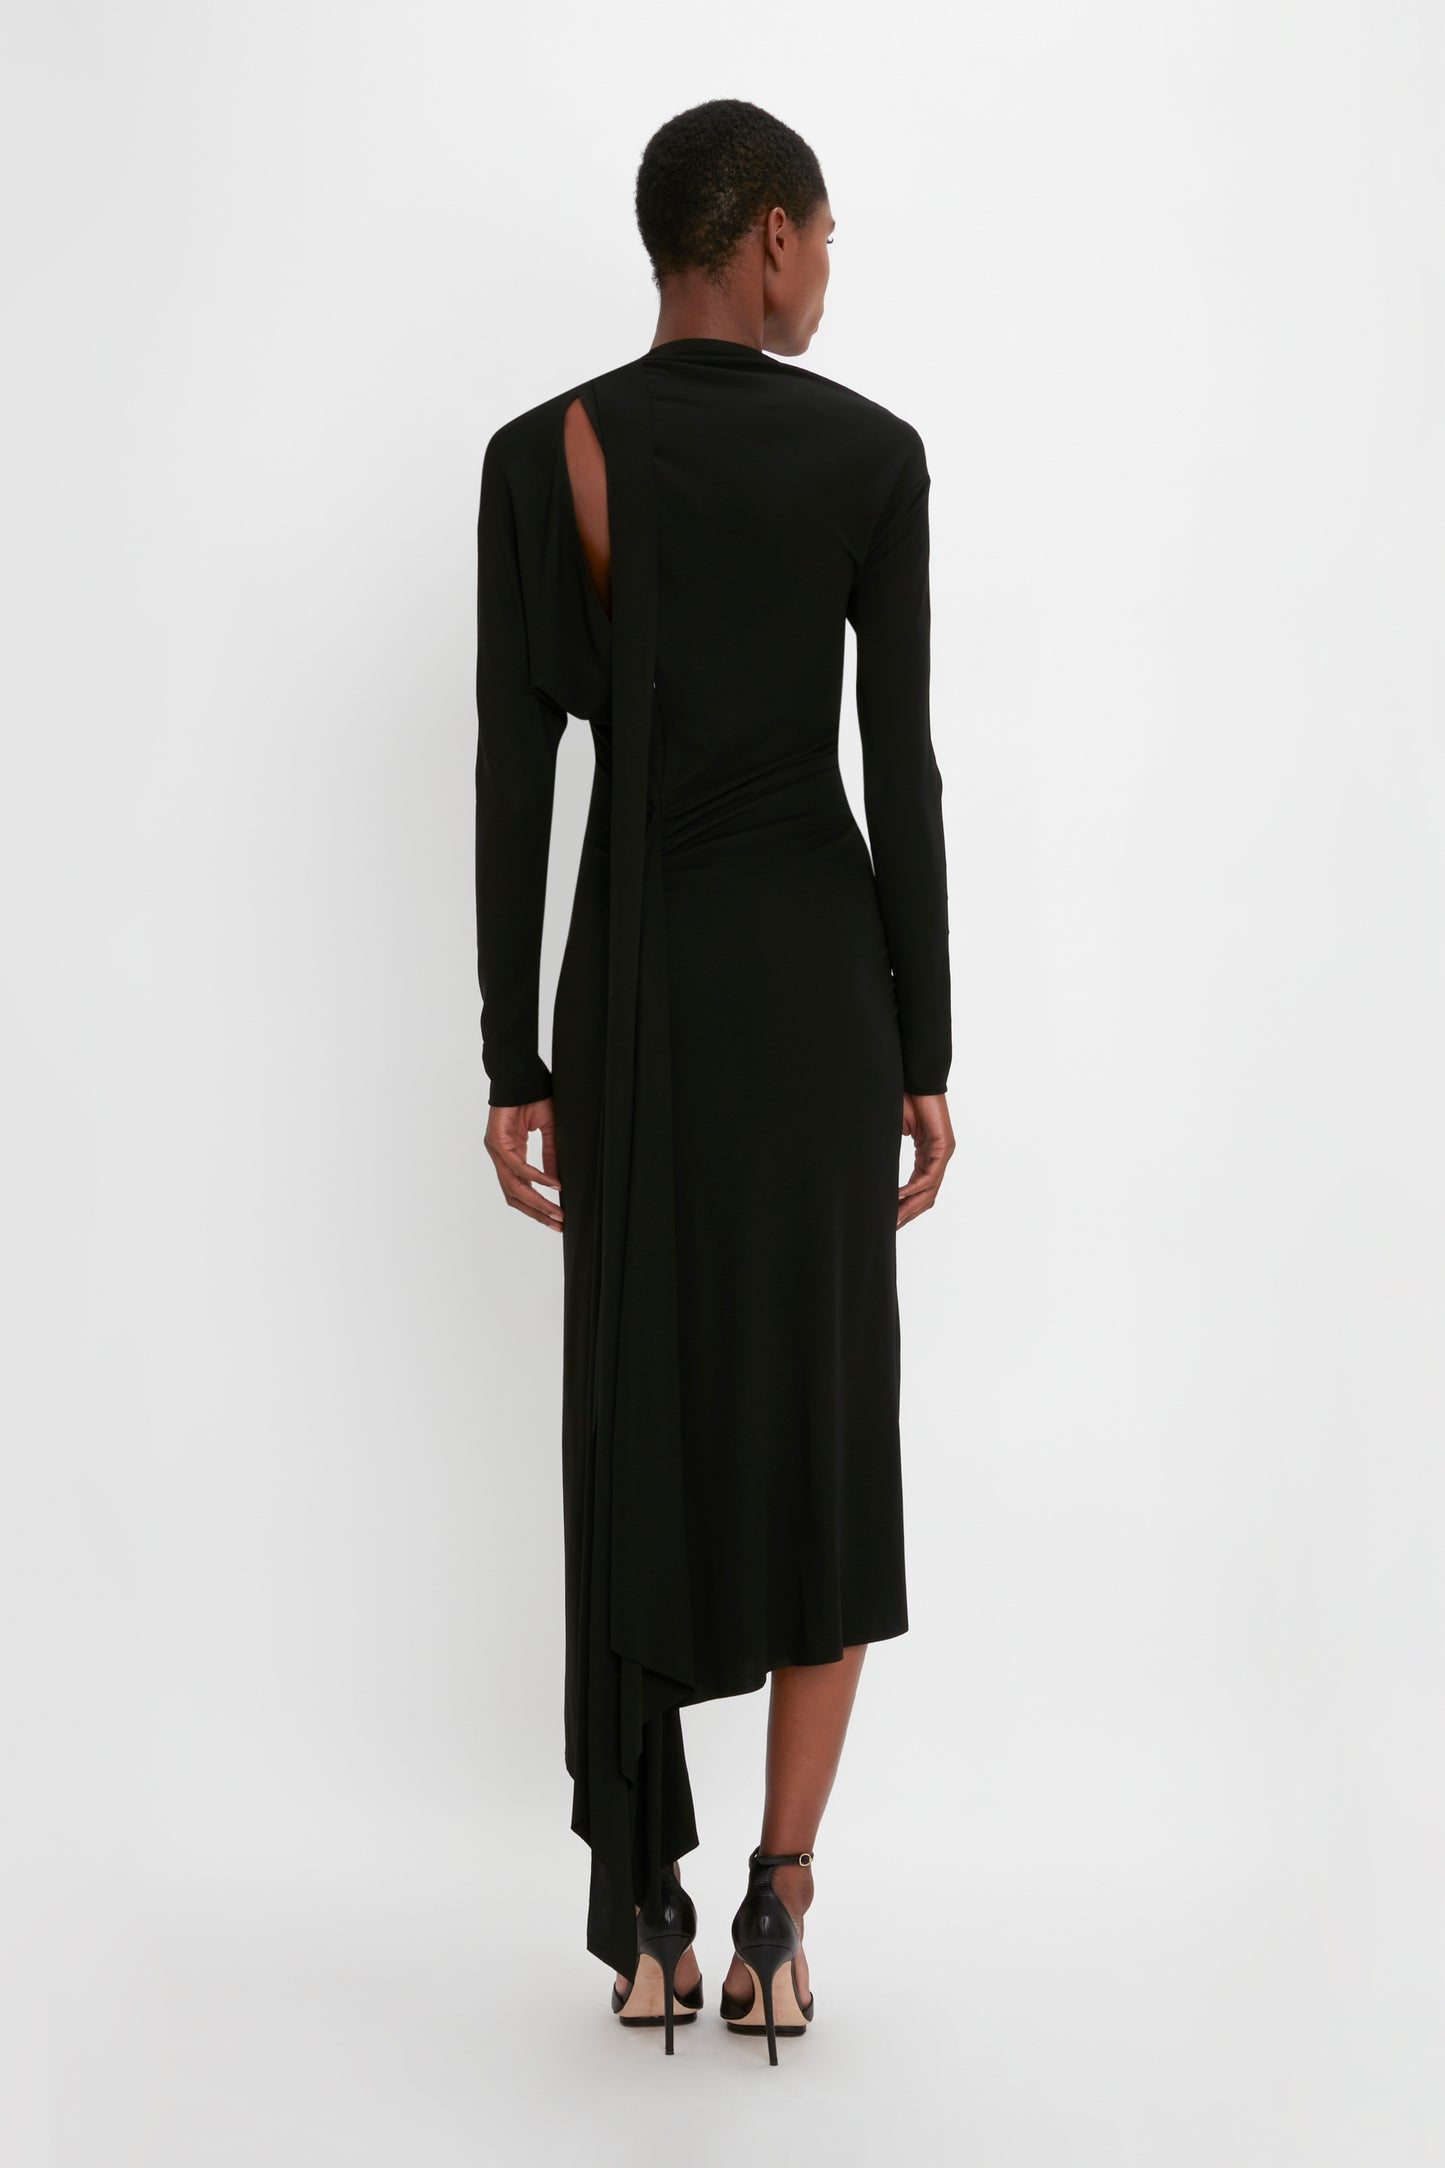 A woman in a Victoria Beckham Slash-Neck Ruched Midi Dress In Black with an asymmetric cut-out and twist details, posing on a plain white background.